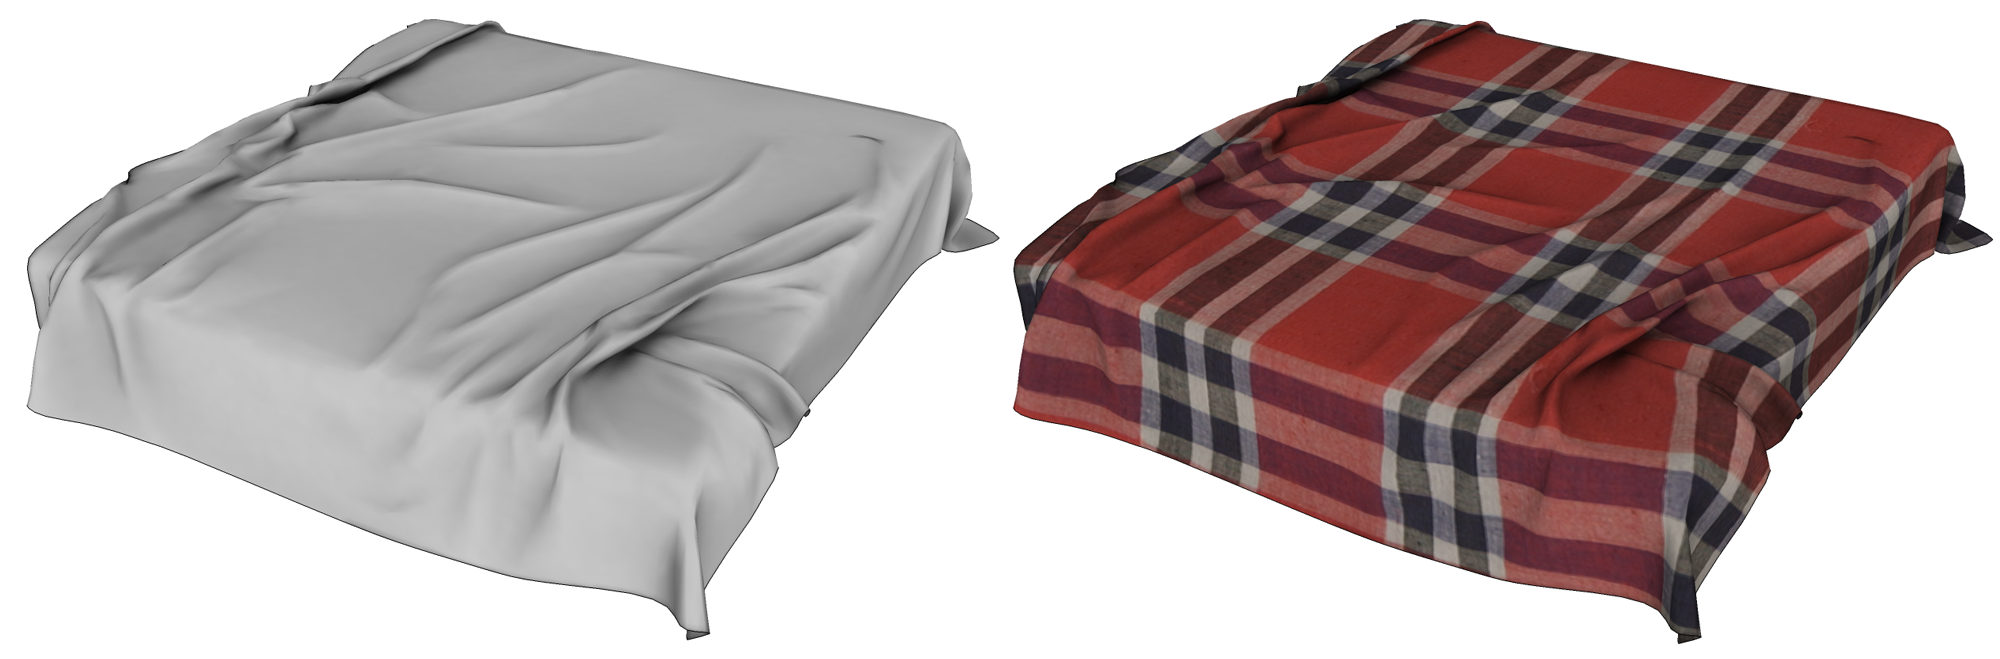 bedding-baked-ao-tex-combined.png